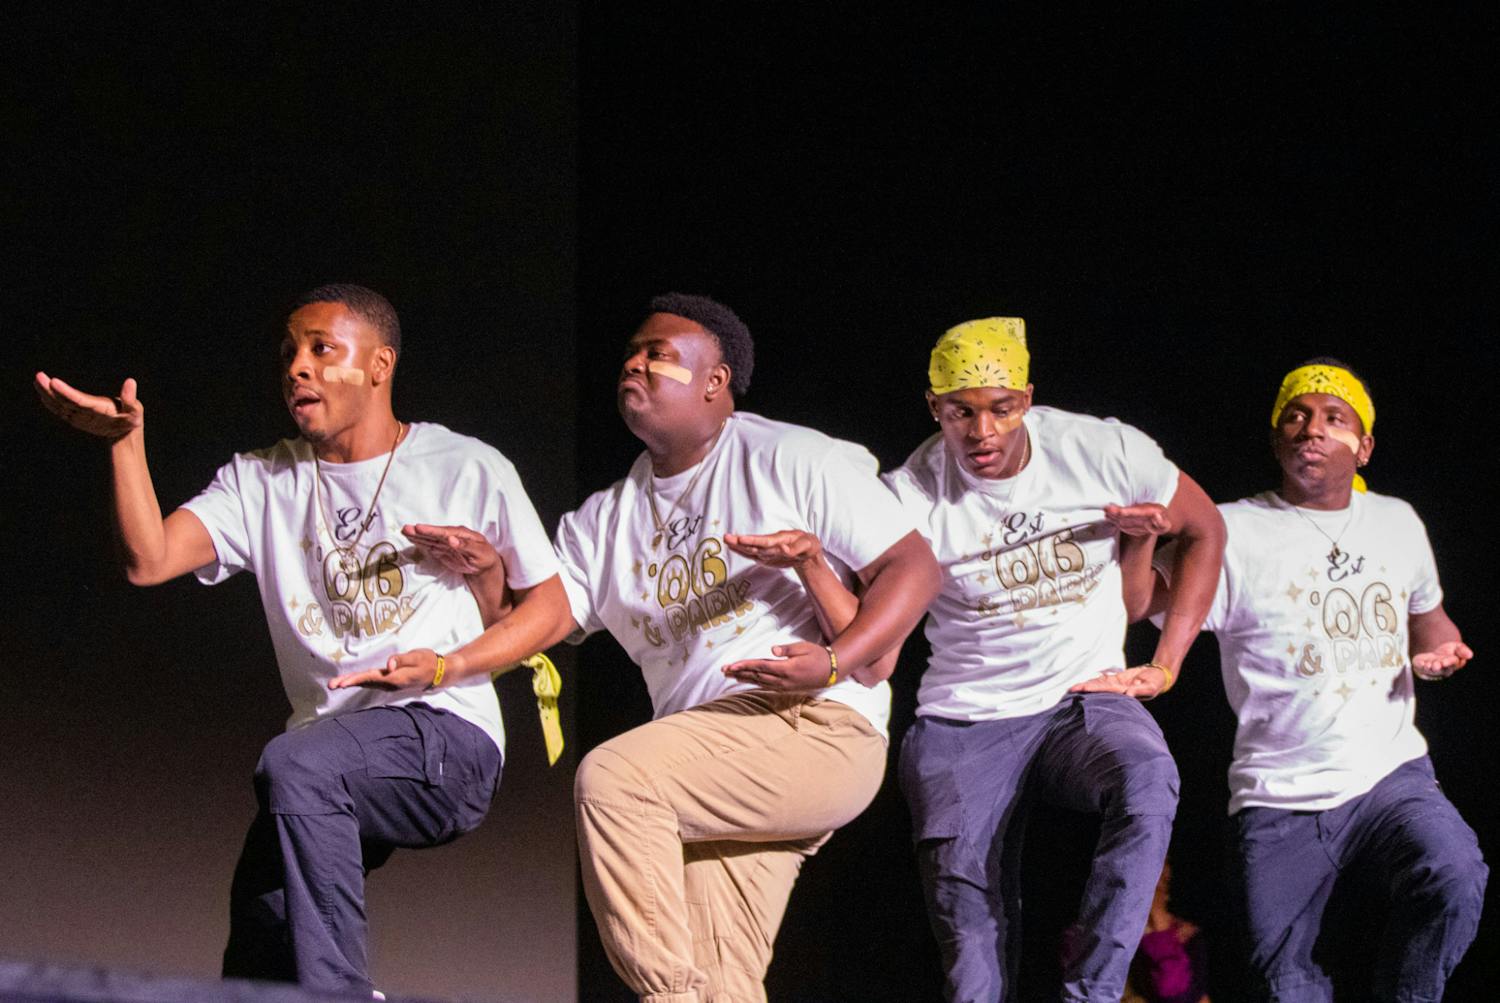 The members of the Theta Nu Chapter of Alpha Phi Alpha Fraternity Inc. compete in the Stroll-Off on Oct. 27, 2022. Although it is a competition, students participating use the Stroll-Off as a chance to have fun supporting their friends.